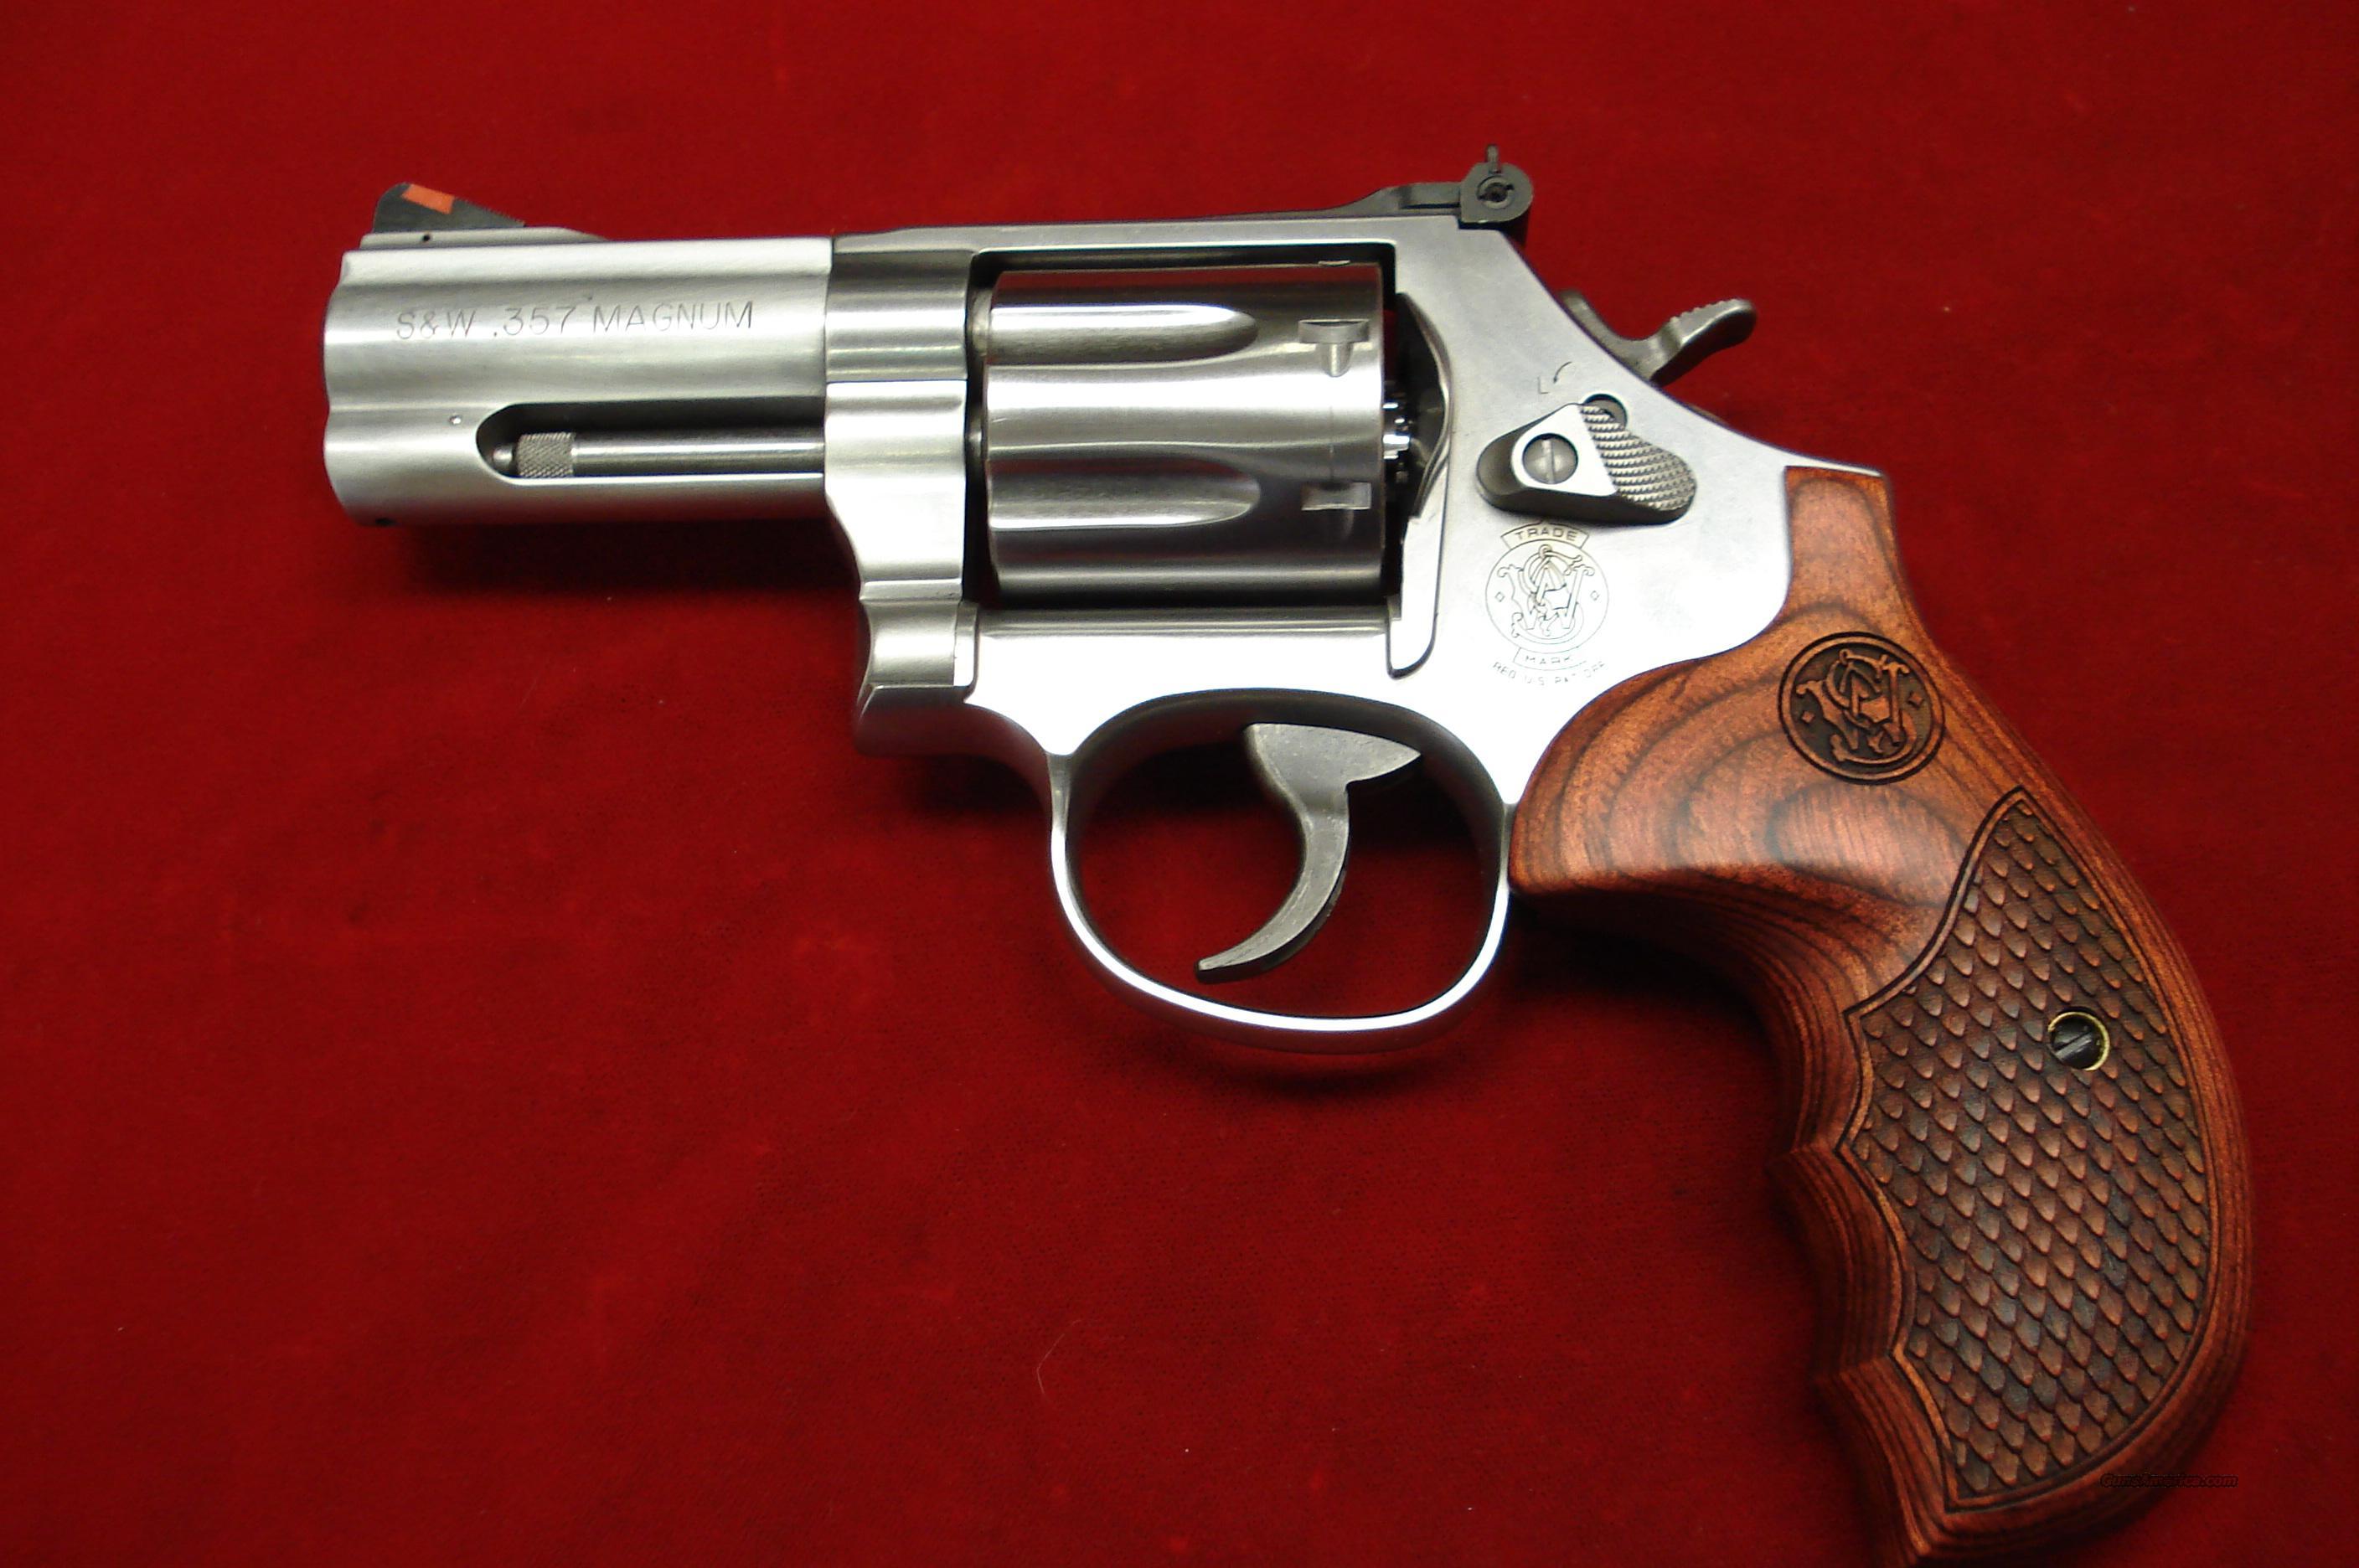 Smith and wesson model 915 manual transfer